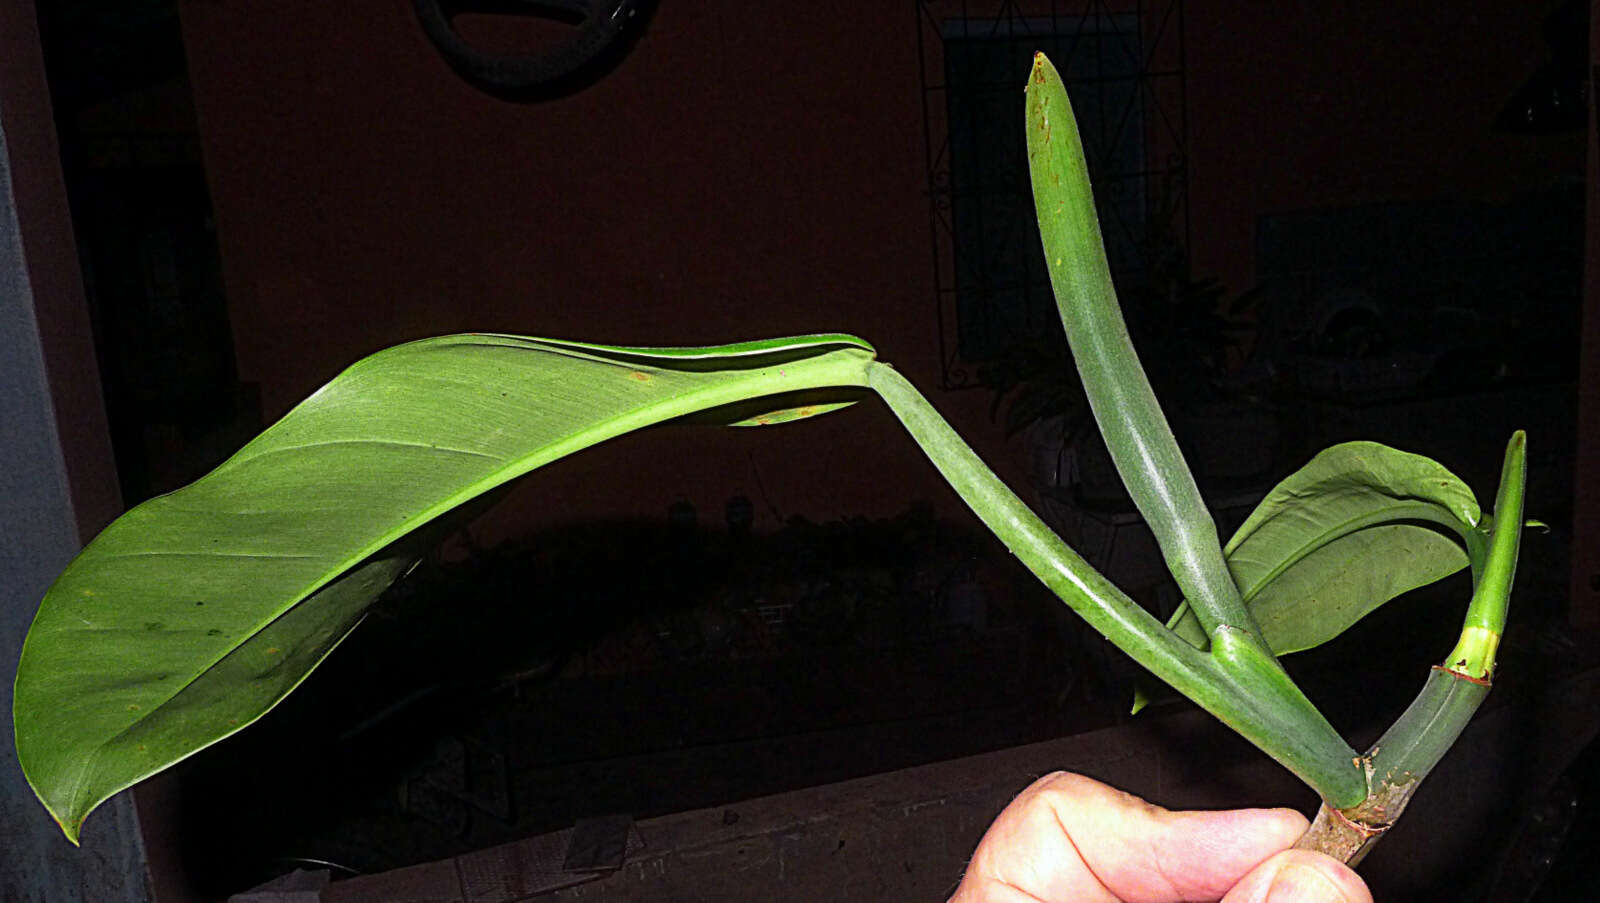 Image of Philodendron blanchetianum Schott